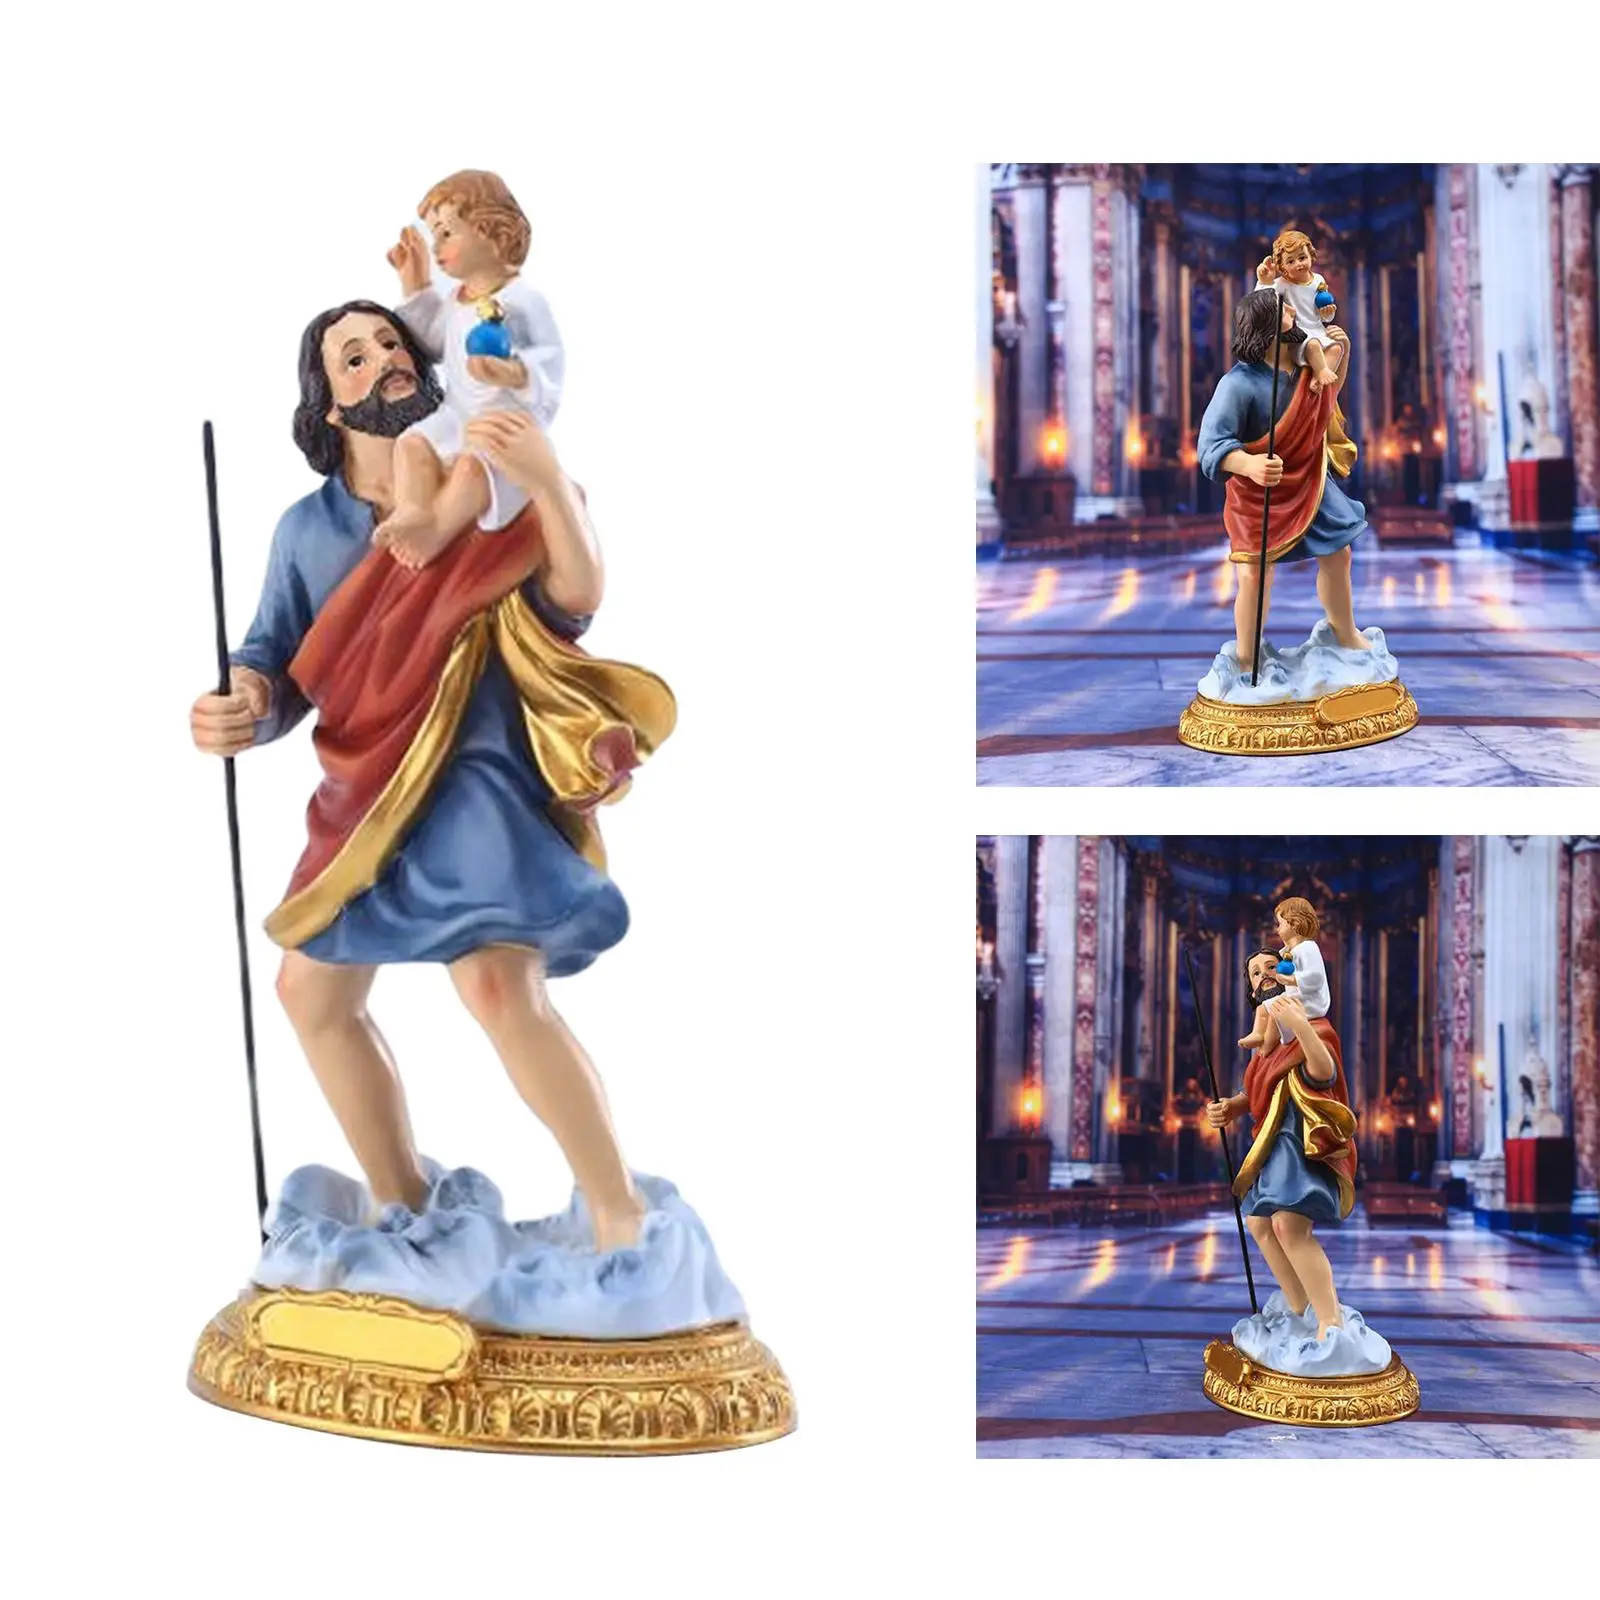 Resin ST. Joseph with Child Jesus Statues Religious Decor Church Ornament for Church Table Living Room Office Gifts